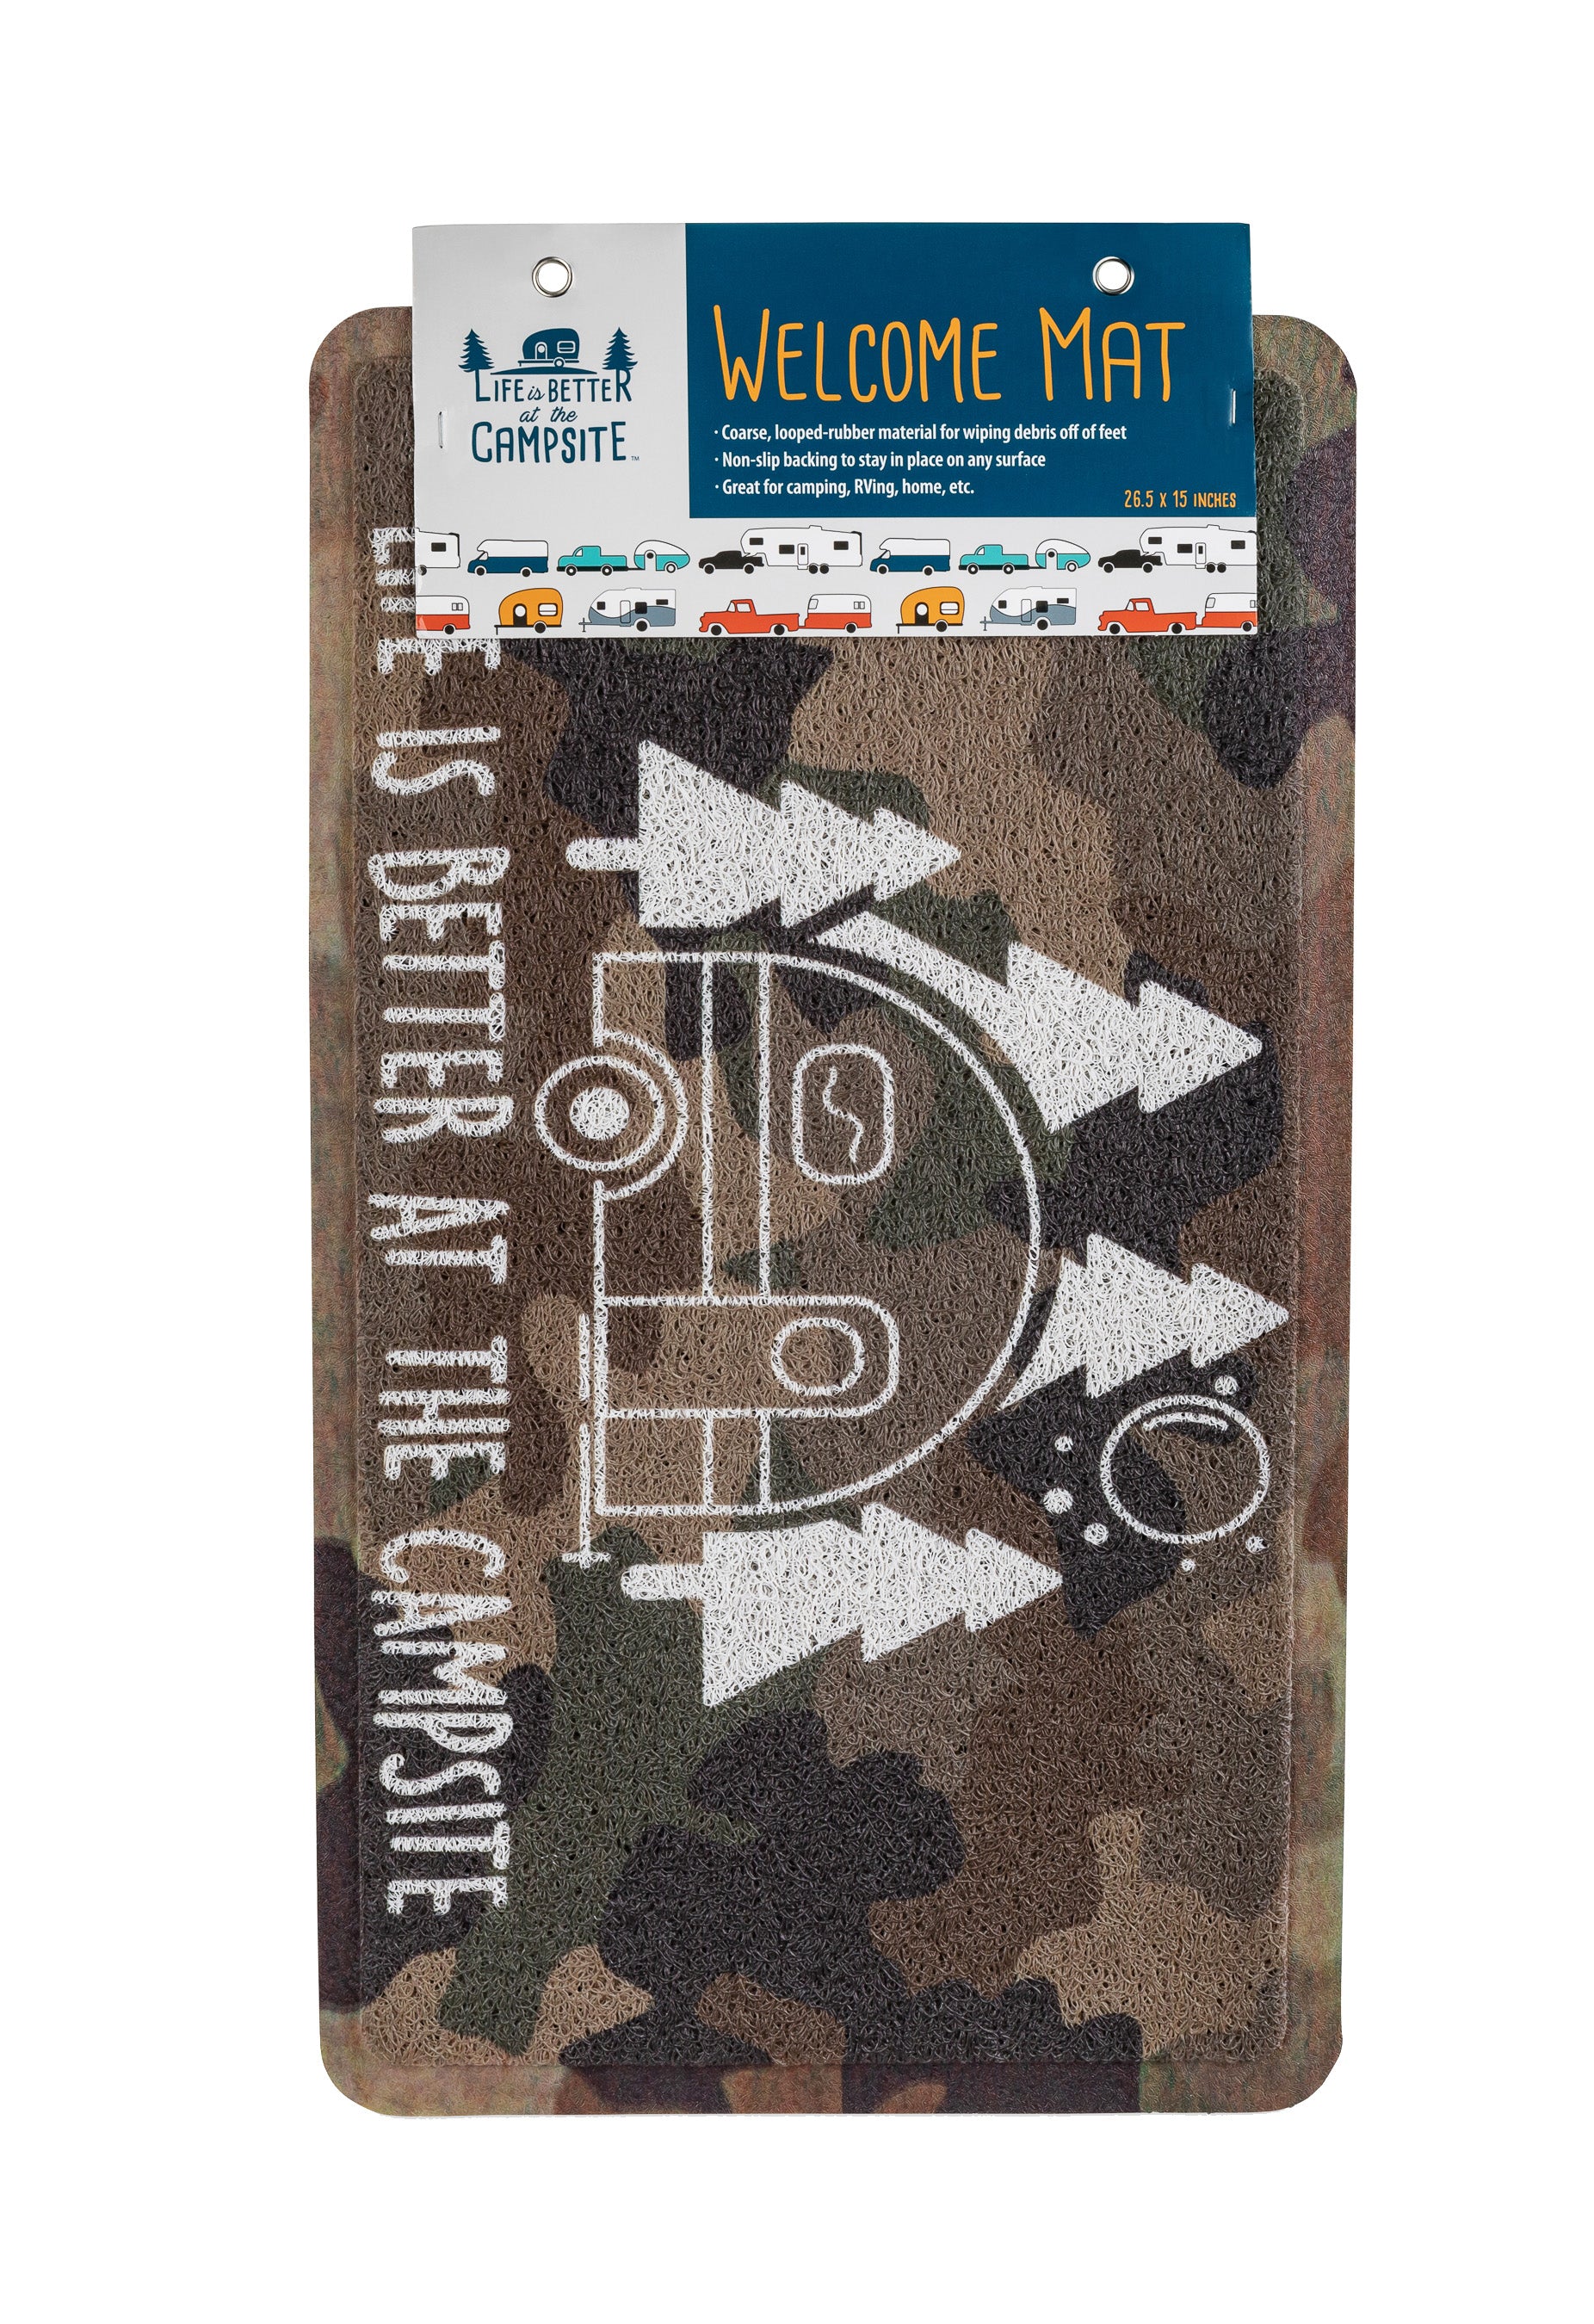 Camco 53447 "Life is Better at the Campsite" Campsite Scrub Rug - 26.5" x 15", RV Beach Bum (Teal)